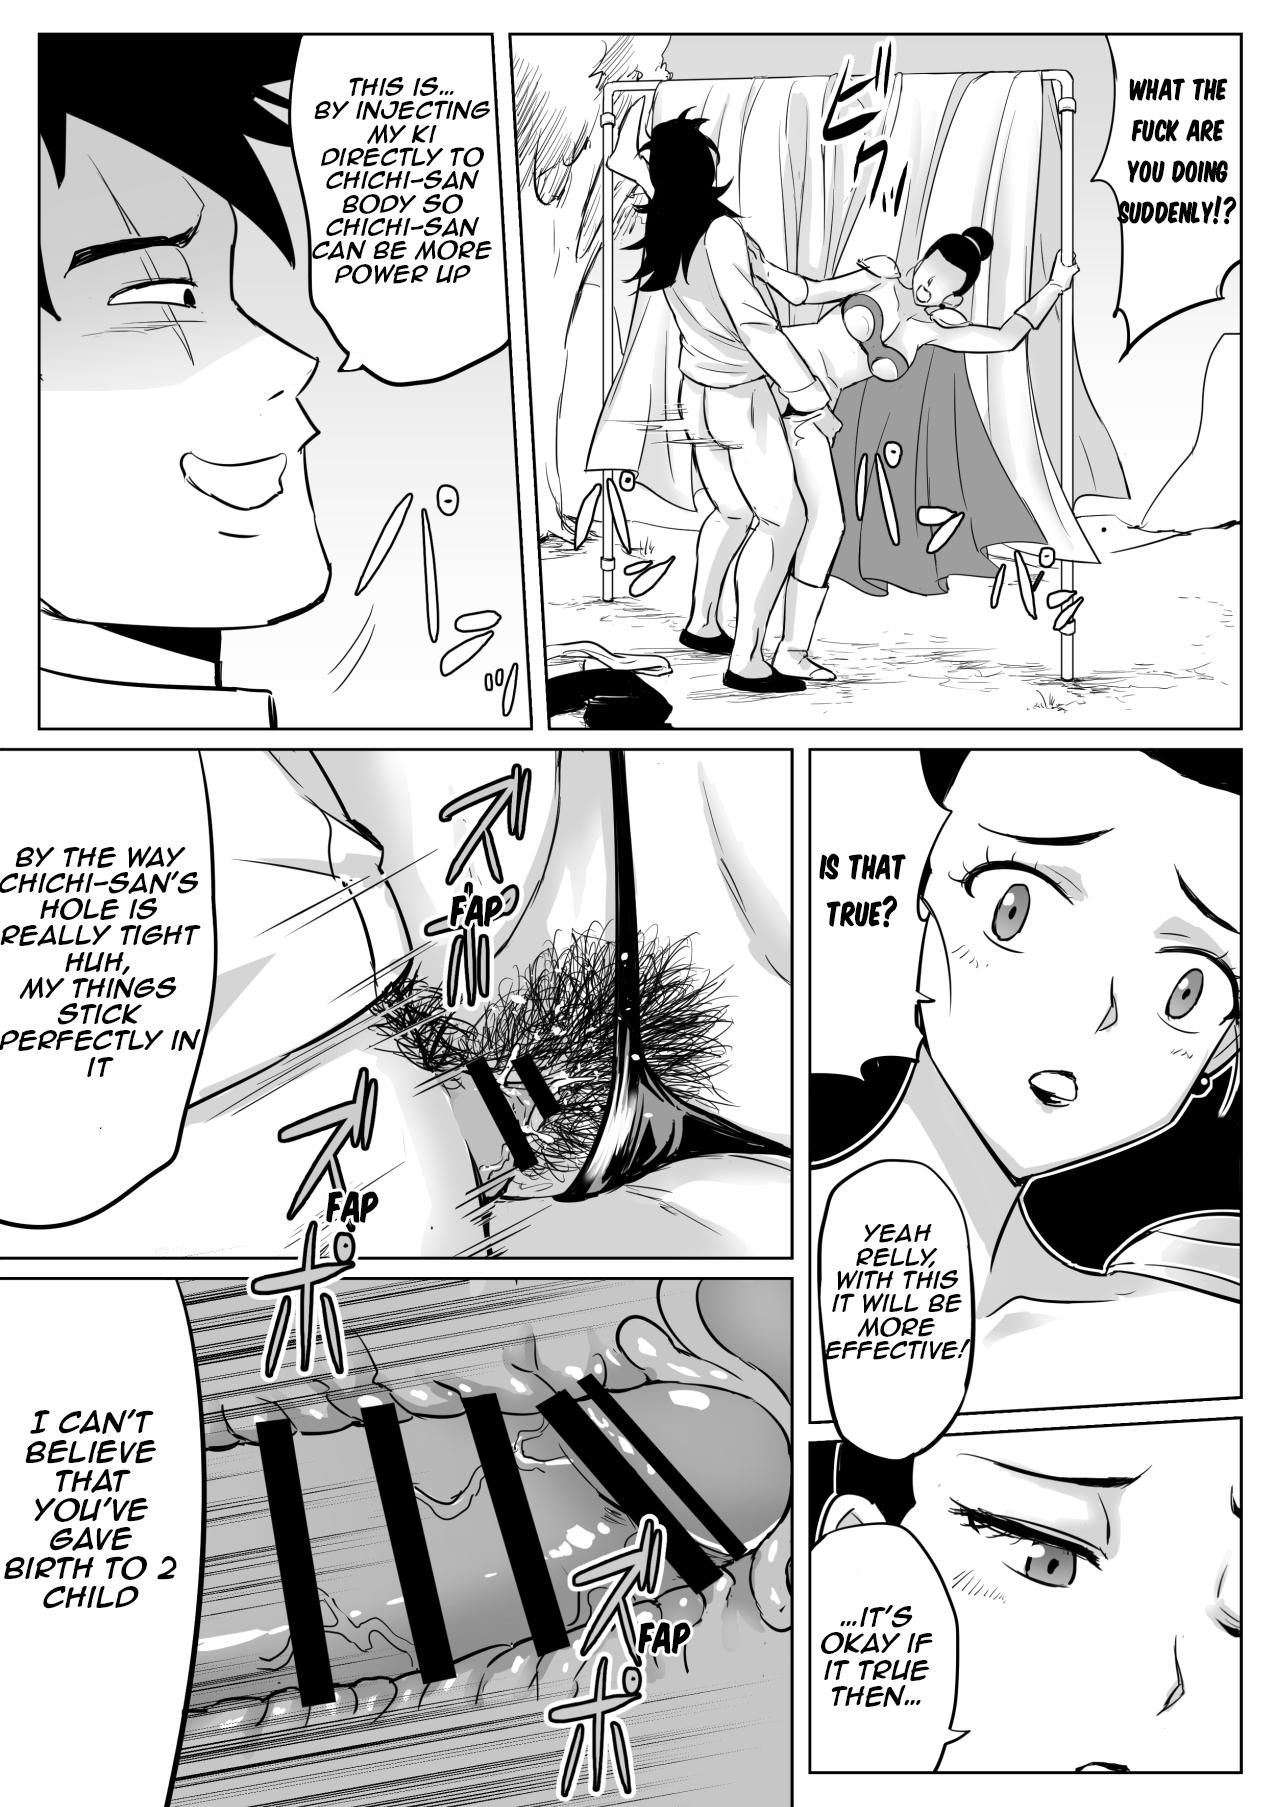 Grande Special Training With Dumb House Wife - Dragon ball Jeans - Page 9